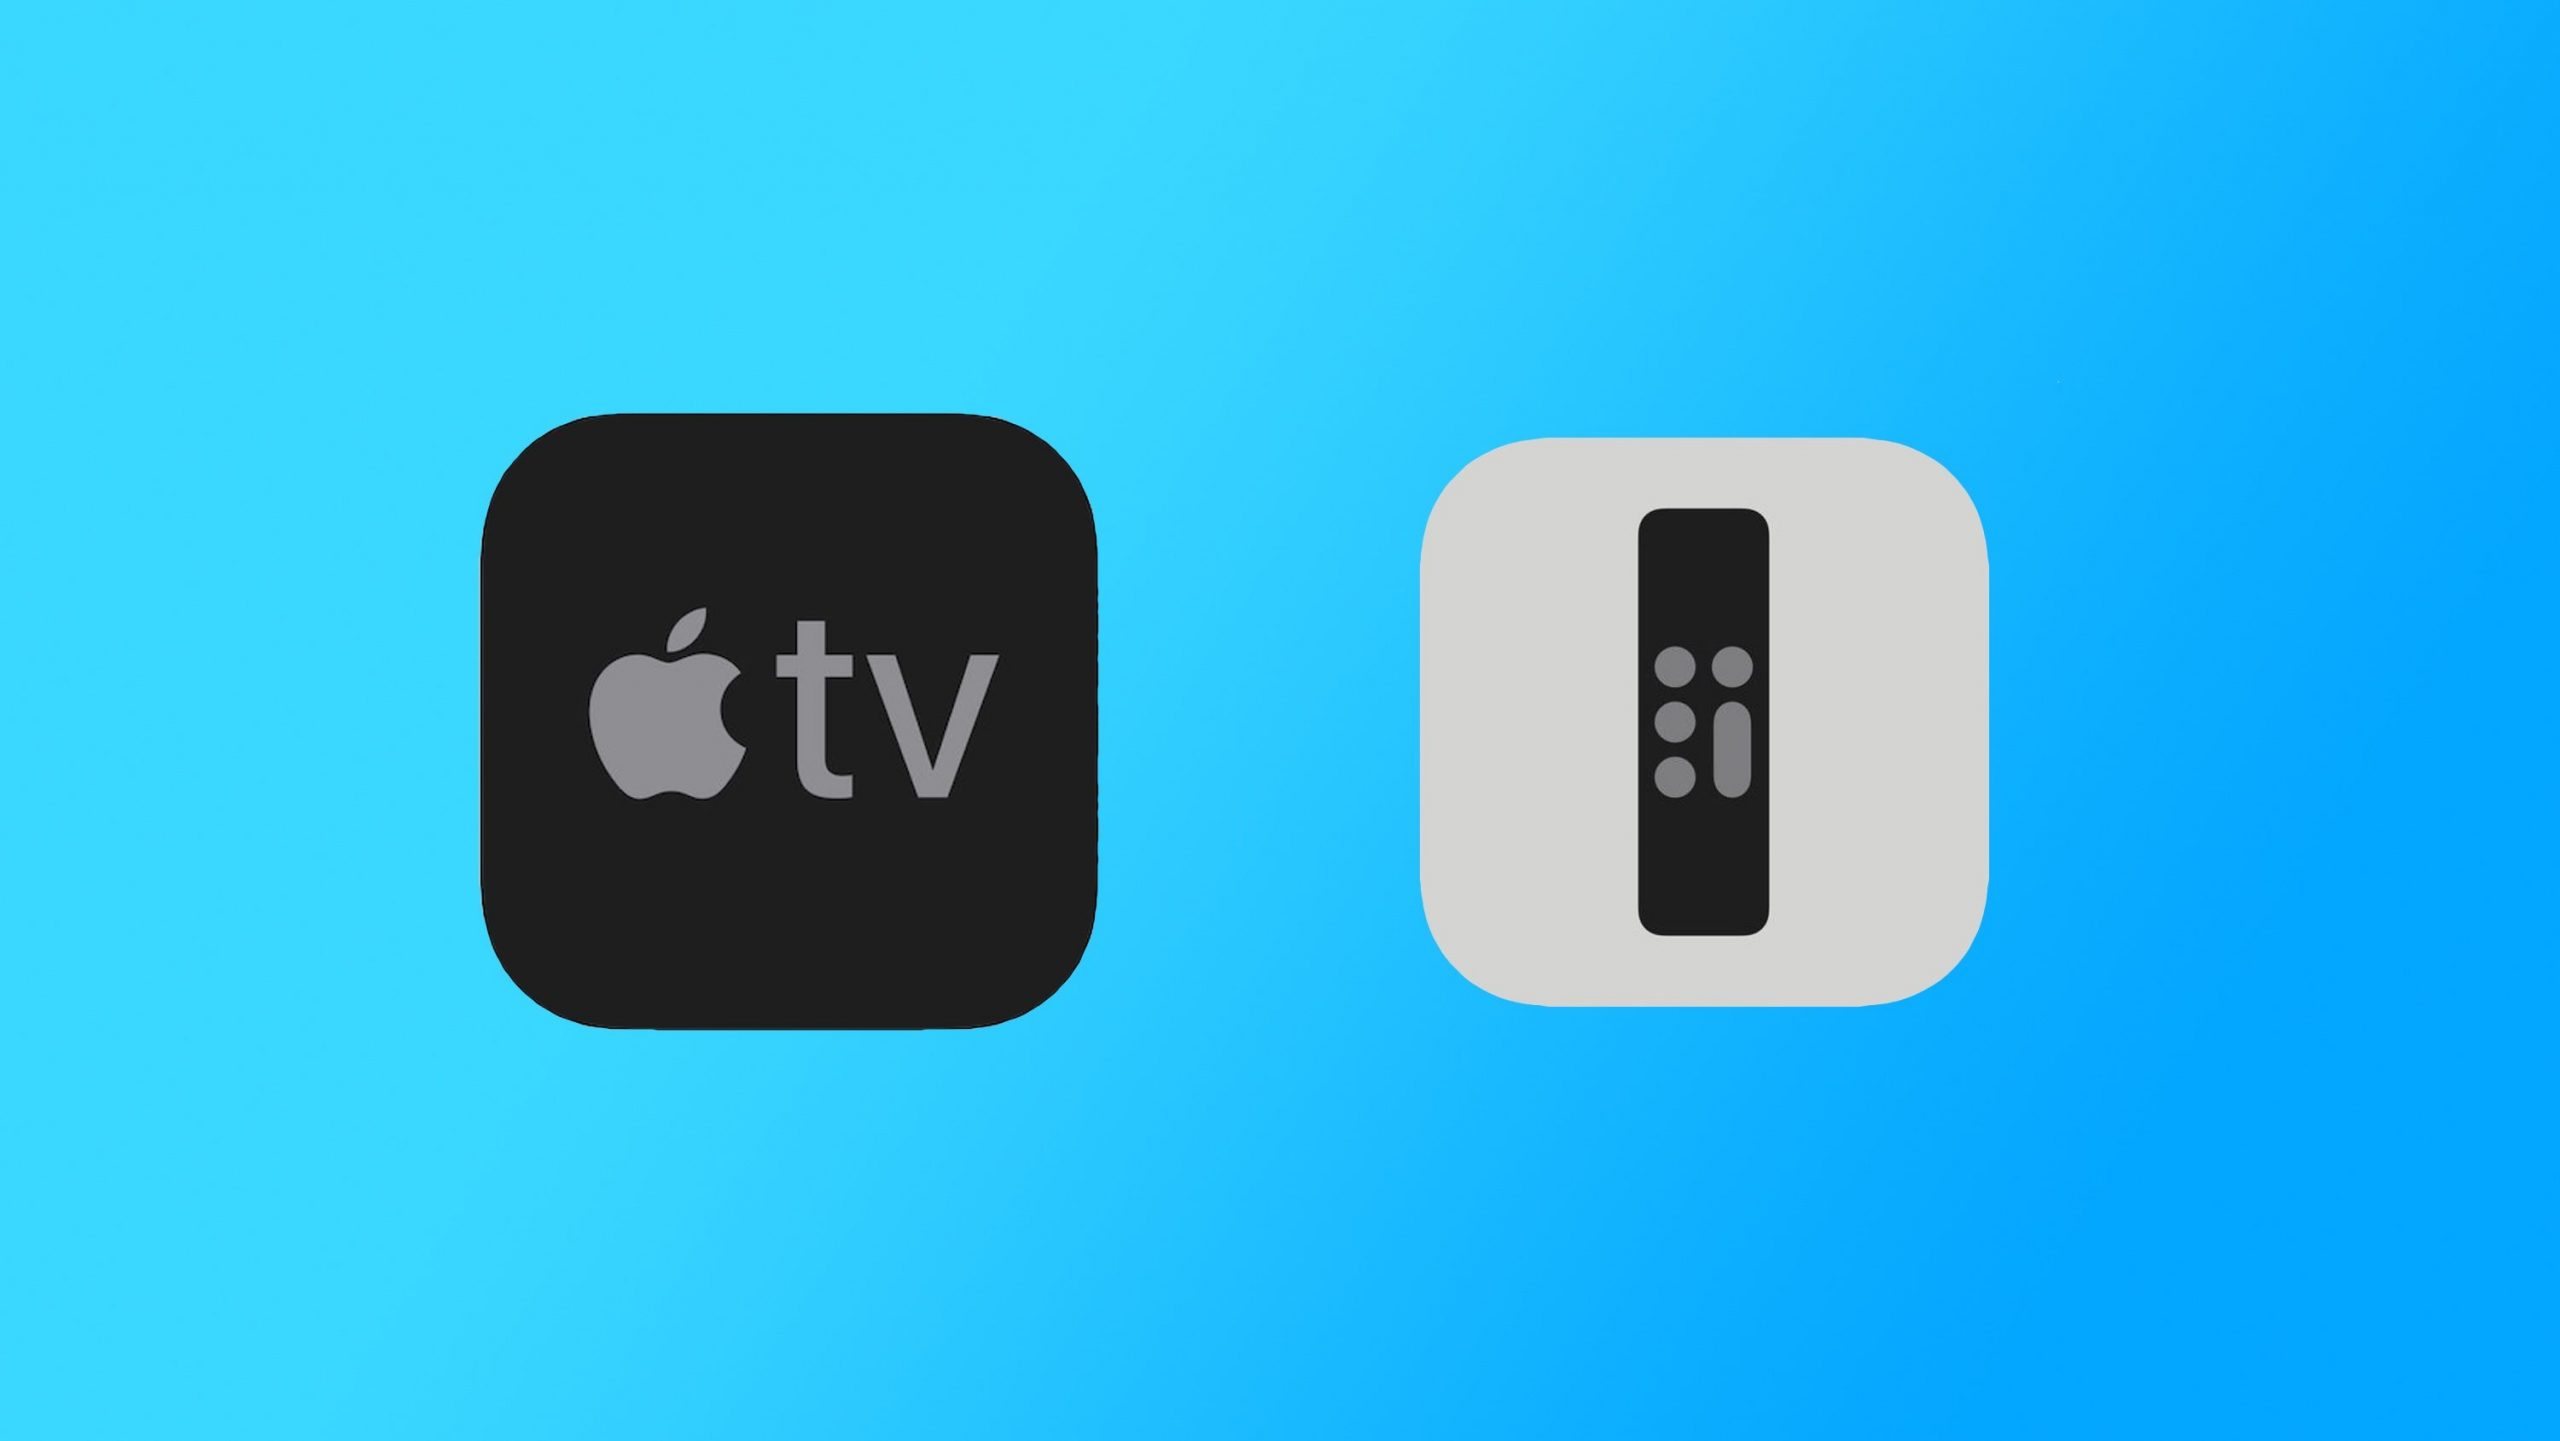 Apple removes 'TV Remote' app from App Store as iOS now has integrated remote